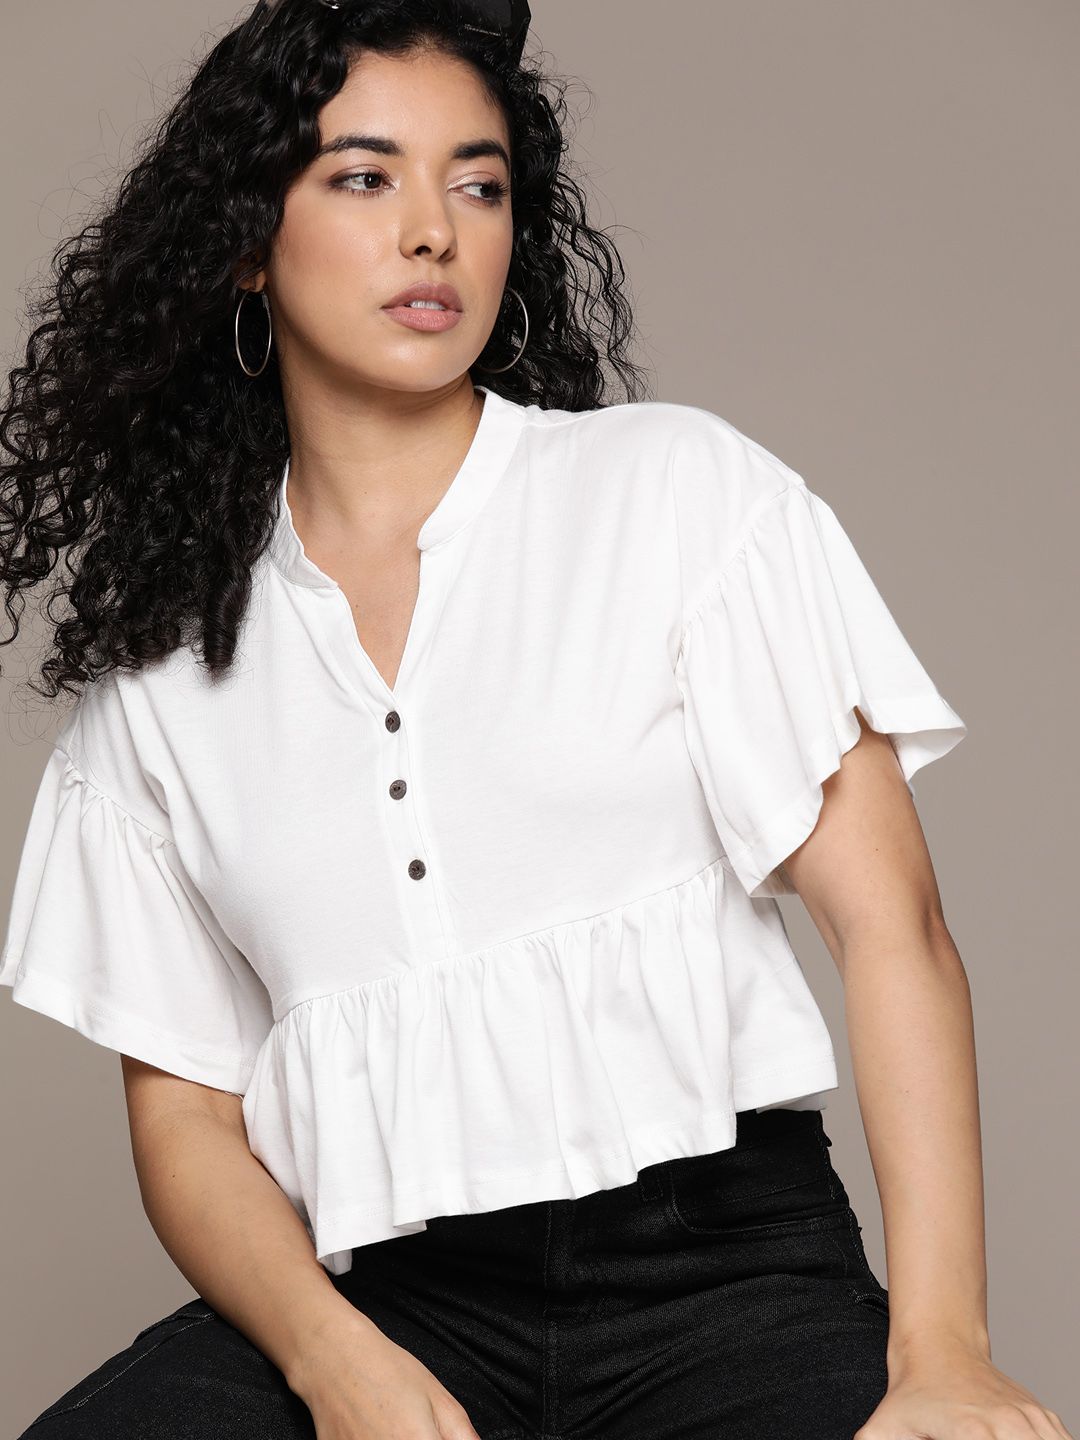 The Roadster Lifestyle Co. Peplum Crop Top Price in India